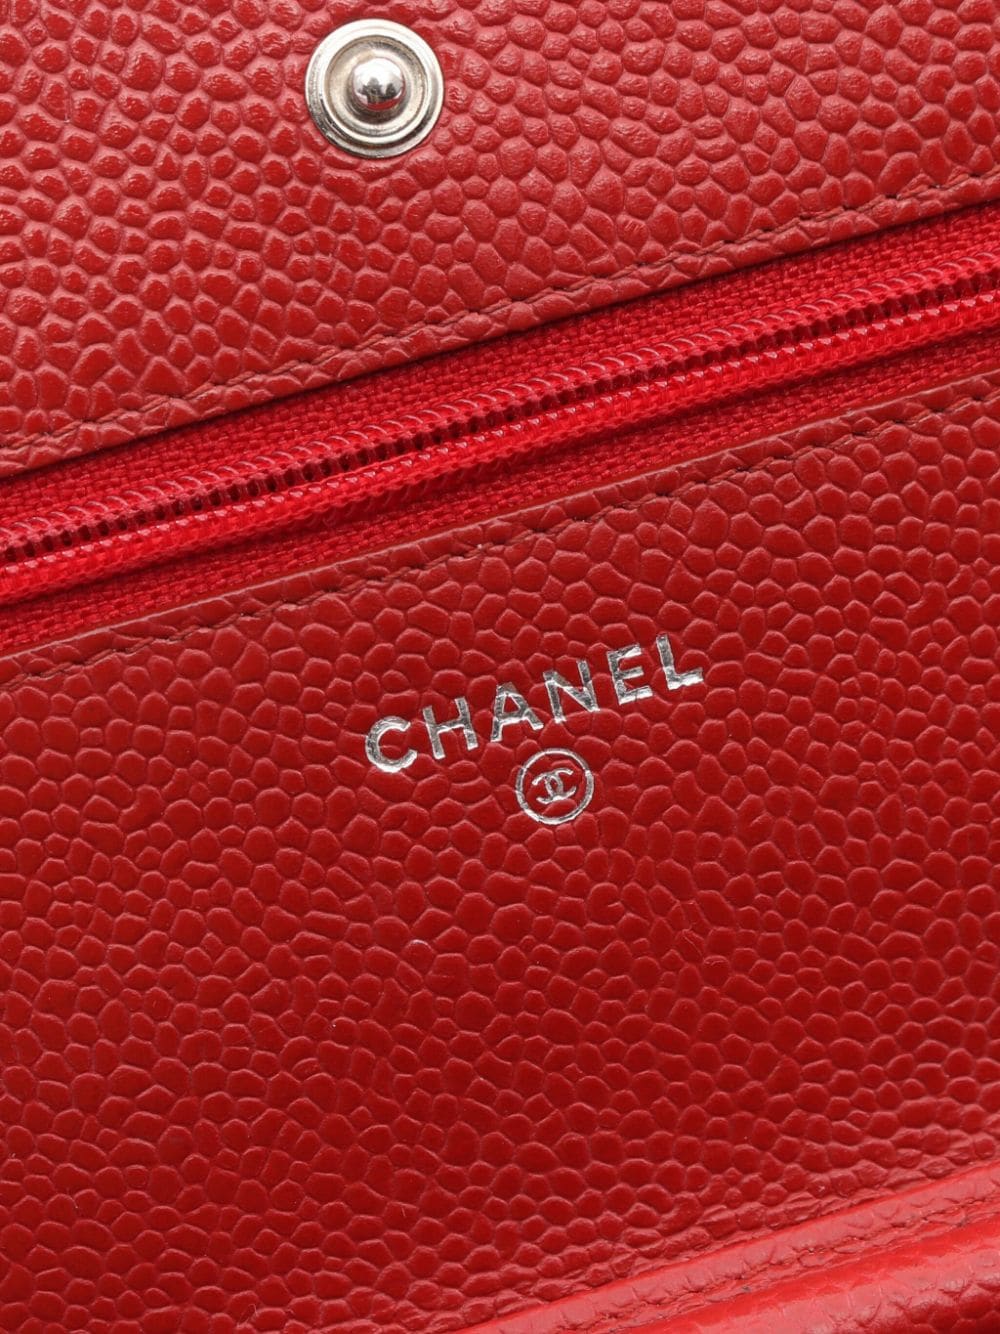 Pre-owned Chanel Wallet On Chain 皮质单肩包（2016-2017年典藏款） In Red